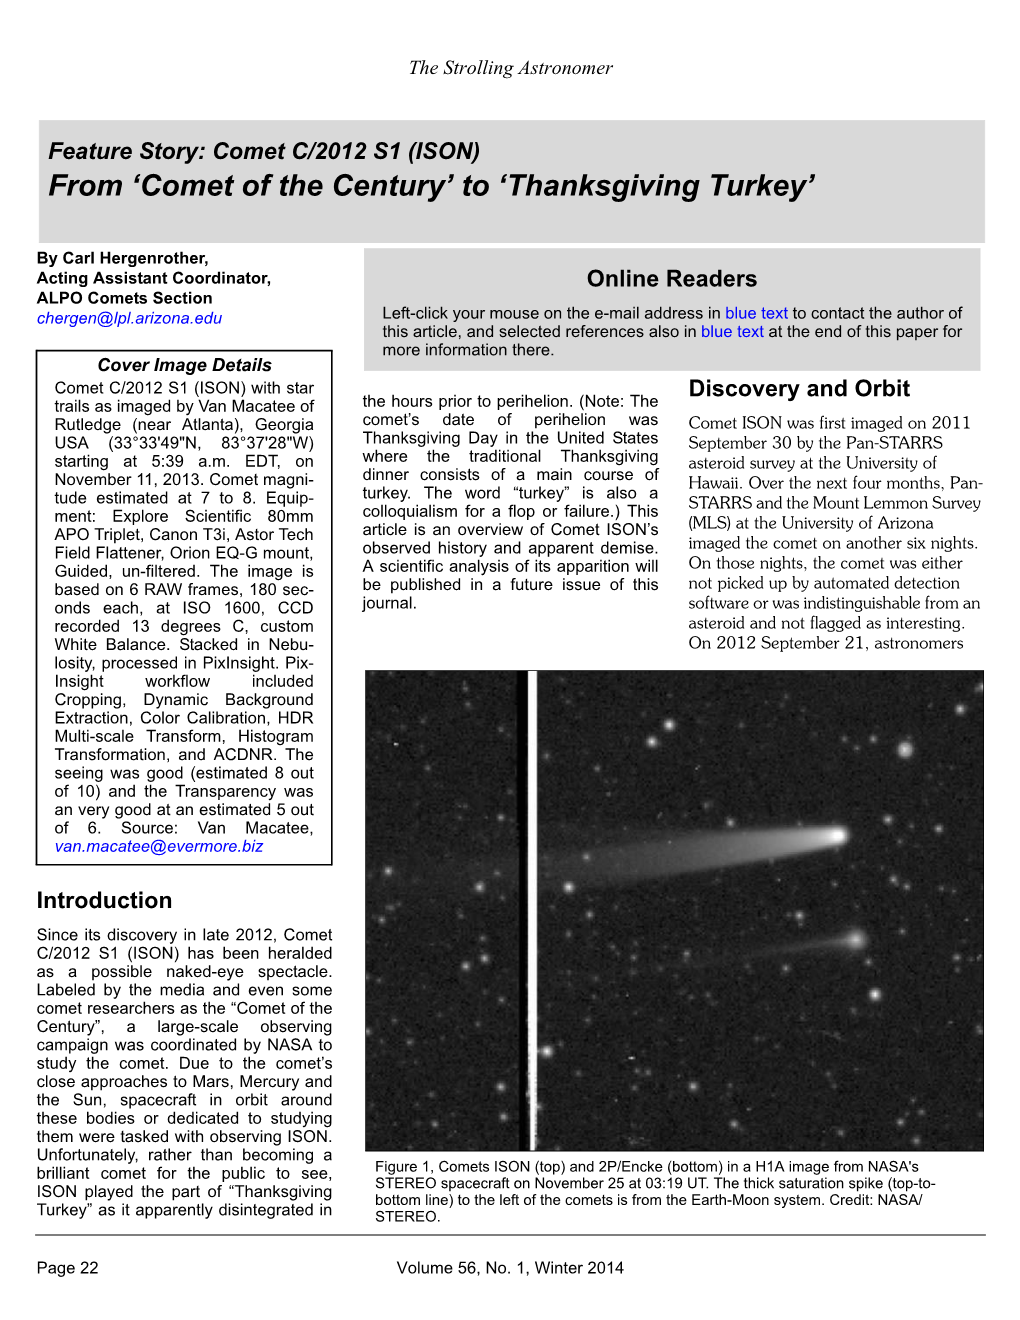 From 'Comet of the Century' to 'Thanksgiving Turkey'